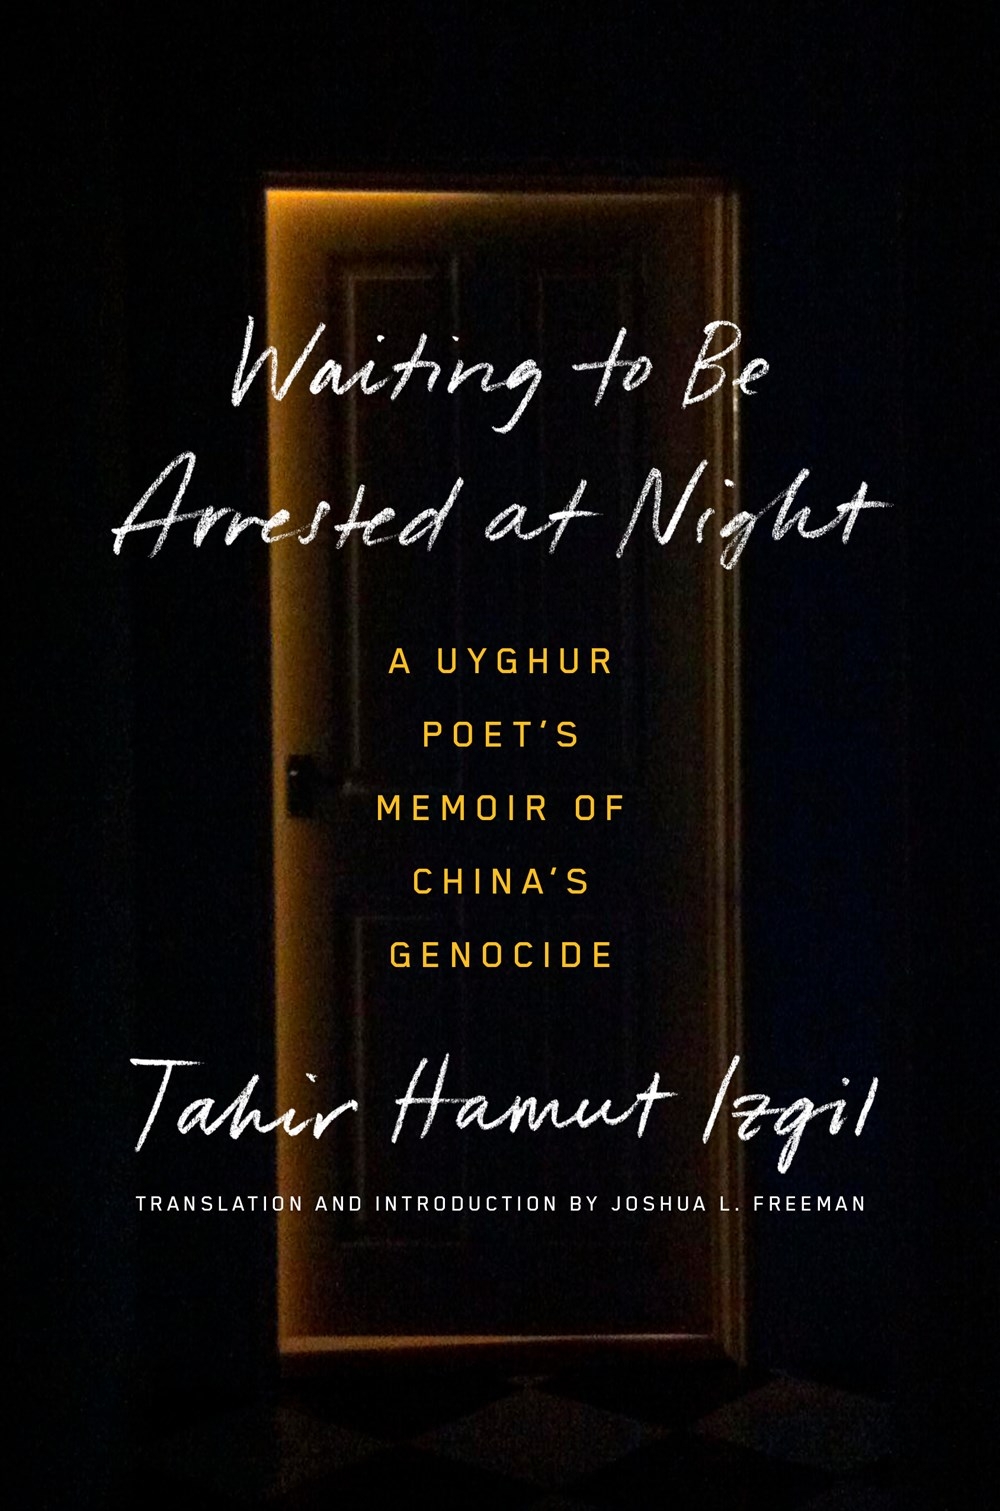 Waiting to Be Arrested at Night: A Uyghur Poet’s Memoir of China’s Genocide